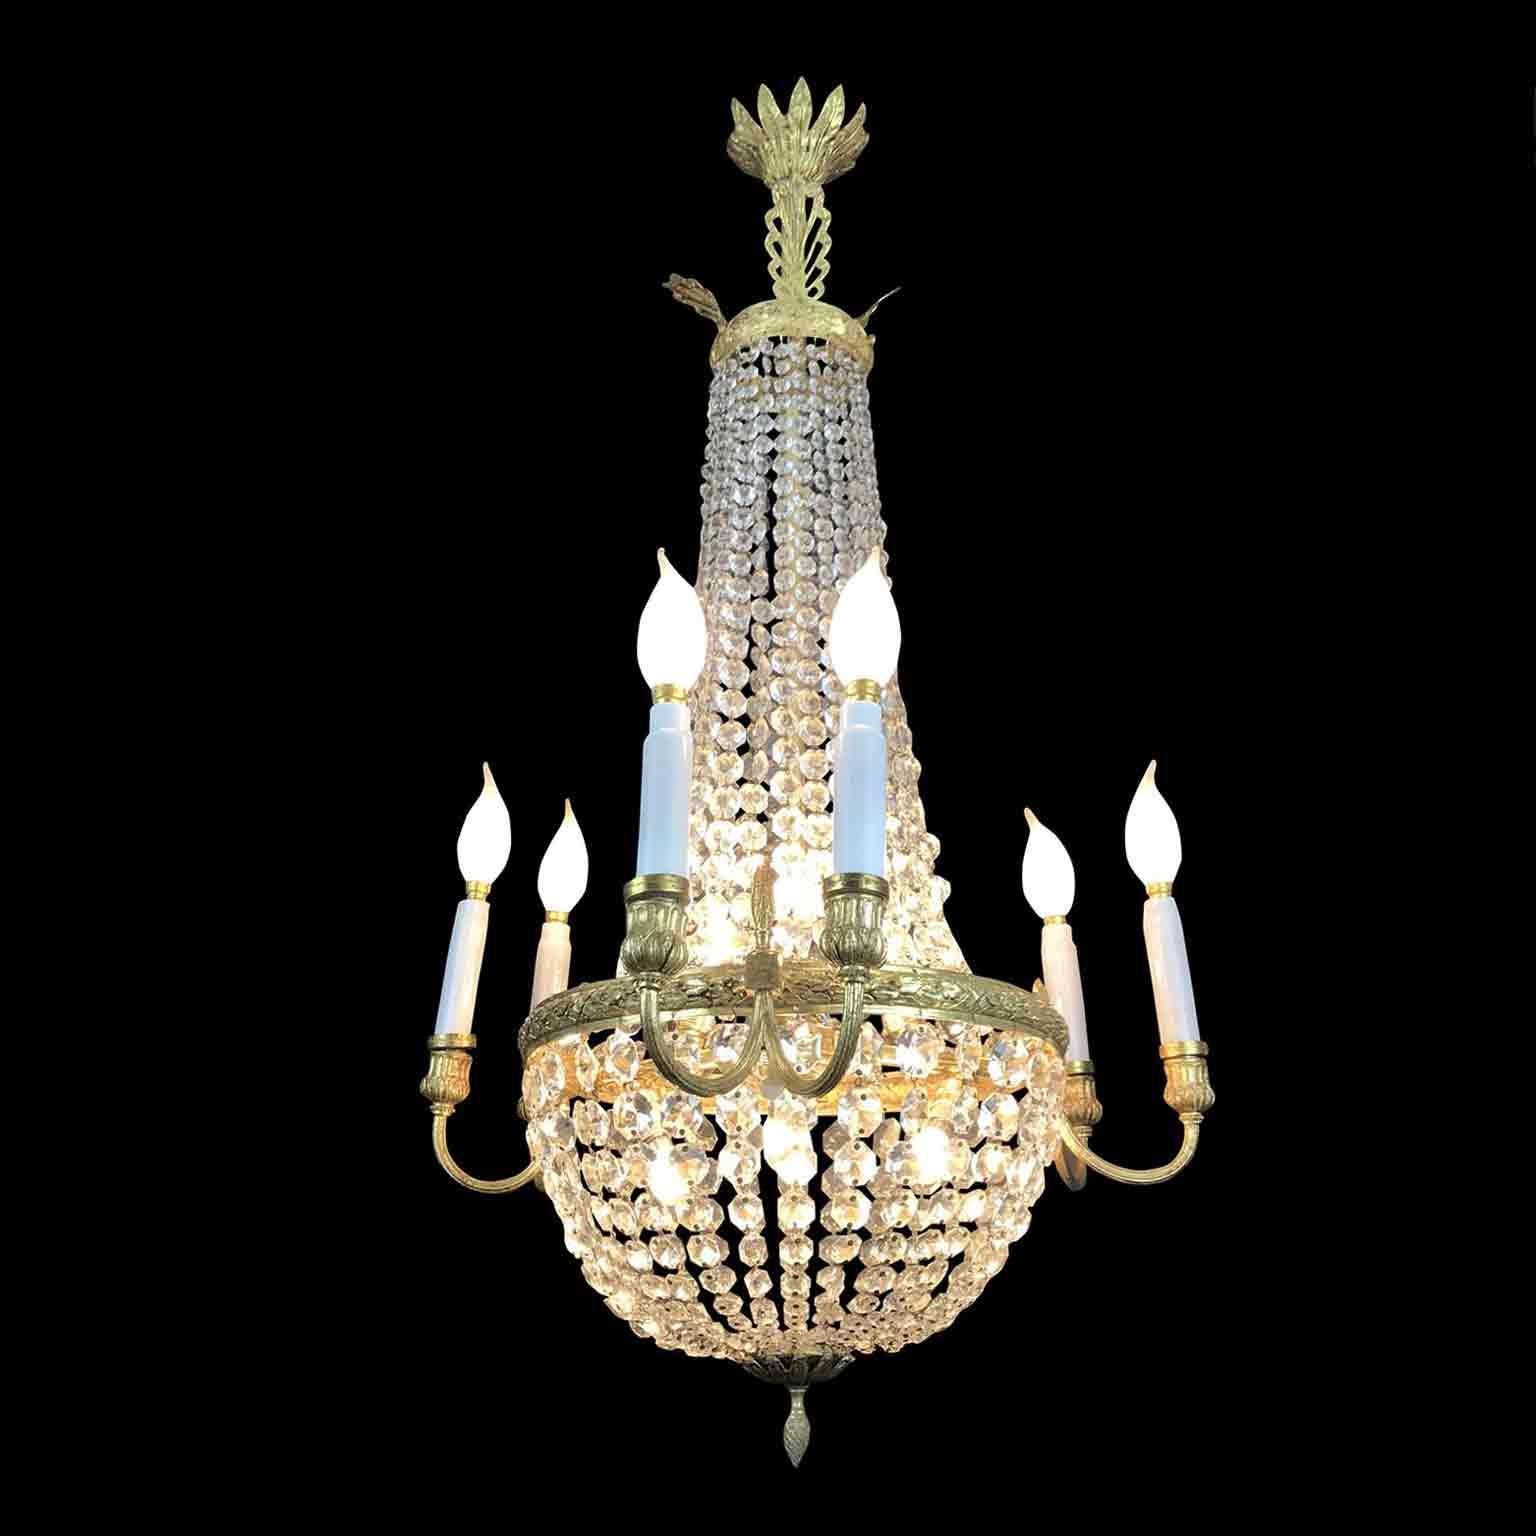 A charming twelve-light Empire style Italian crystal chandelier, a gilded cast bronze chandelier realized in Italy in the early 20th century, richly decorated with waterfall crystal festoons, an ormolu circular structure decorated by cast and